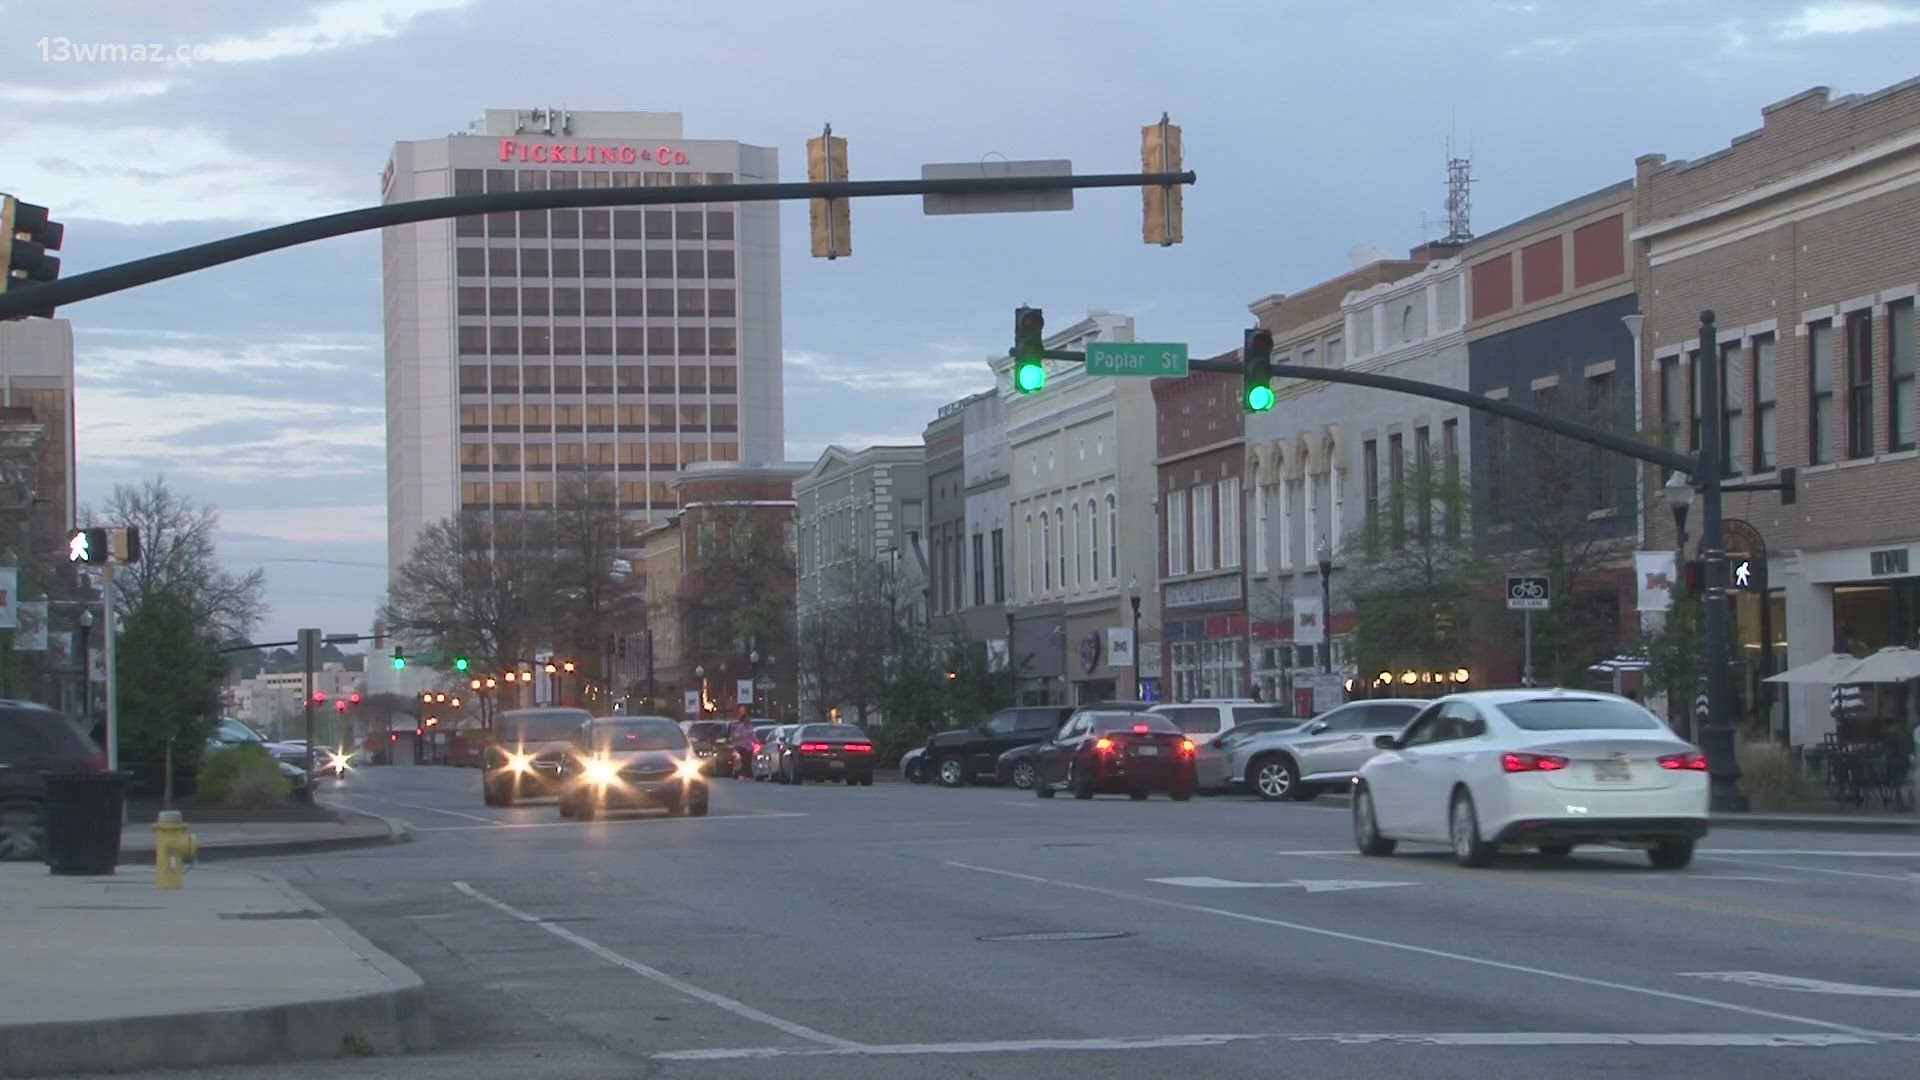 Bibb County Sheriff's Office met with downtown Macon business owners to find out what they'd like to see when it comes to safety and security for them